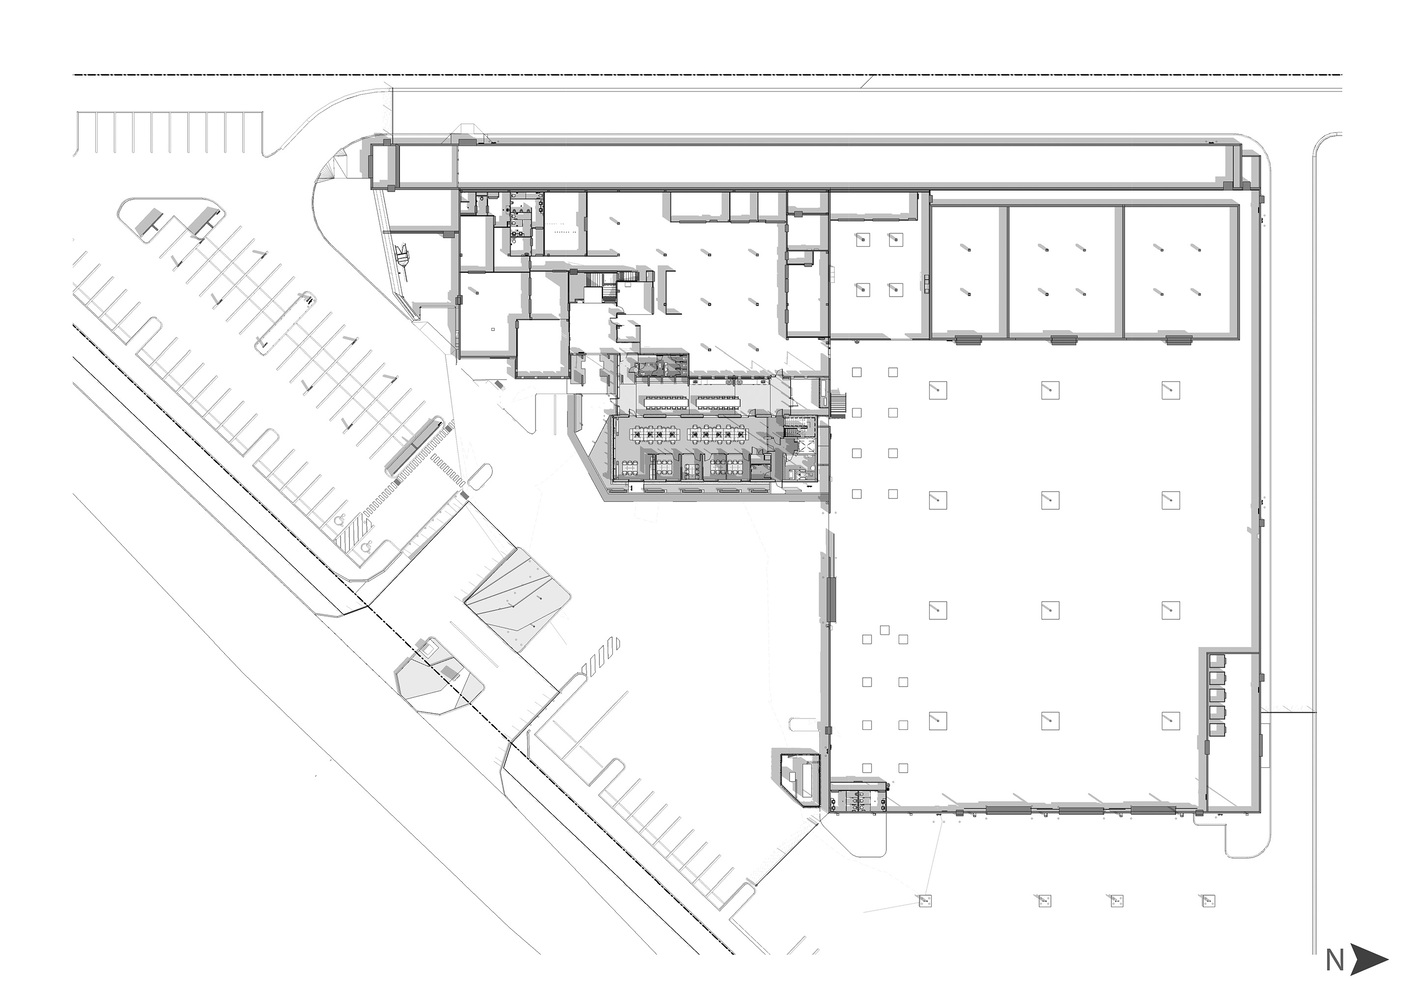 Site Plan NIOA Timber Tower, Souce by KIRK